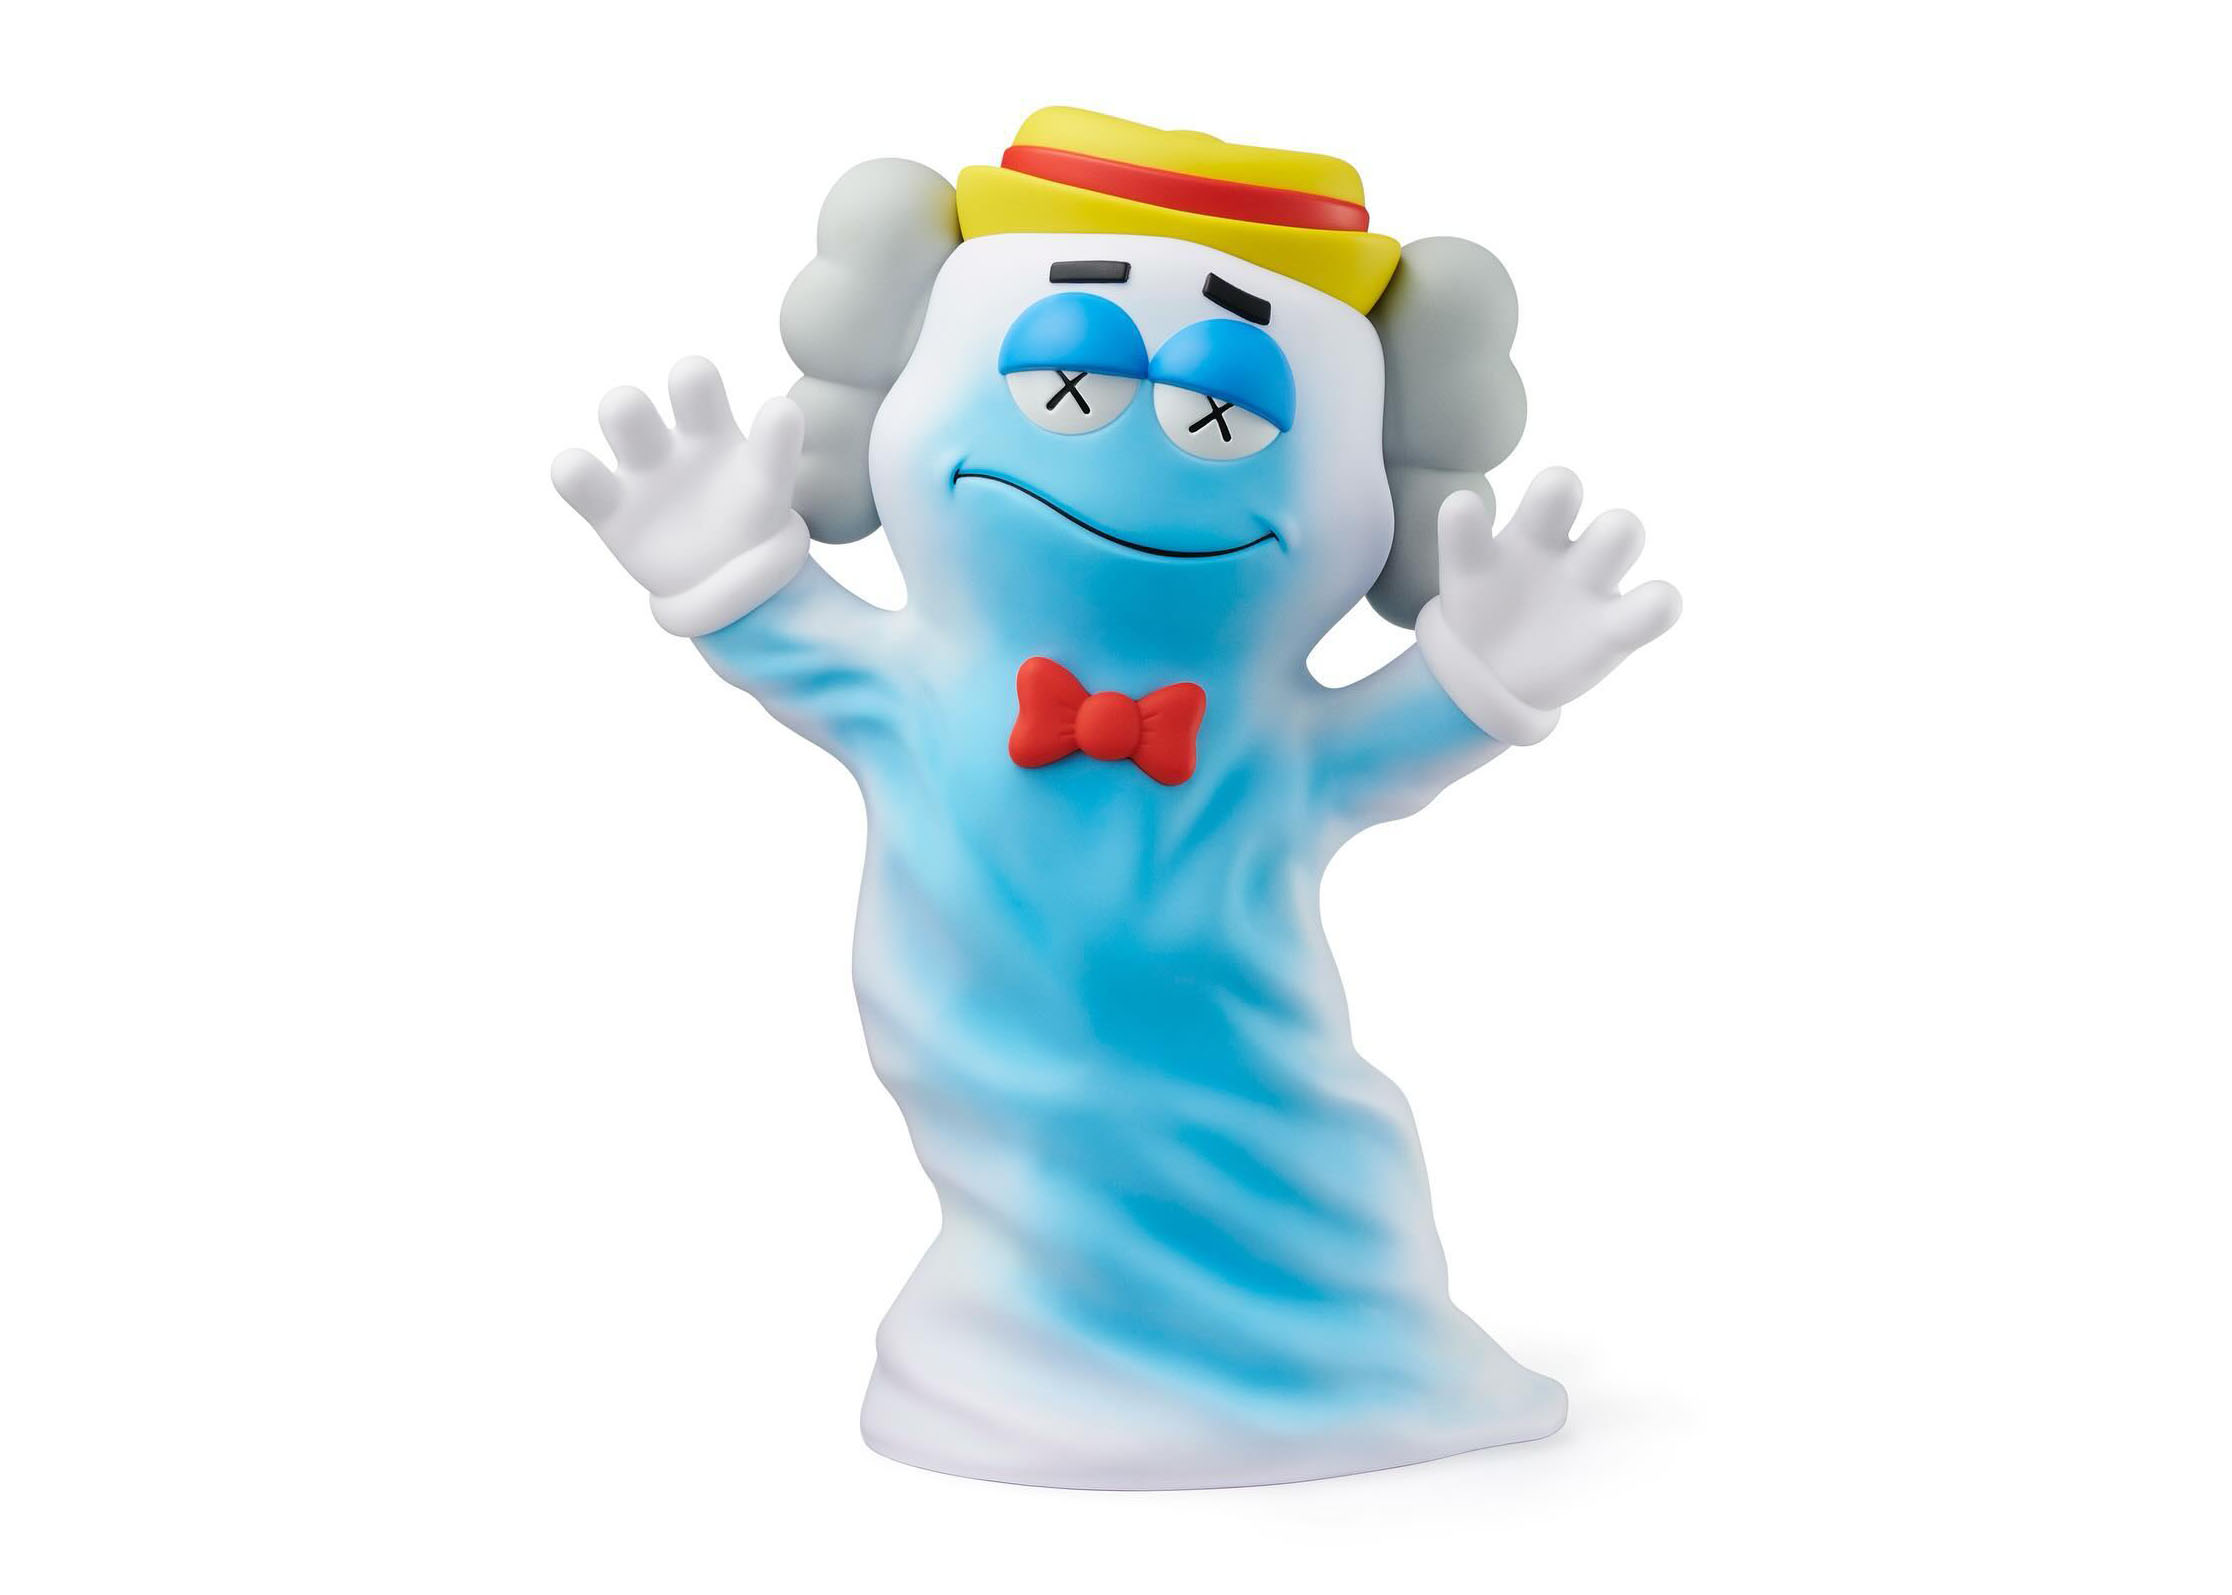 KAWS Cereal Monsters Boo Berry Figure